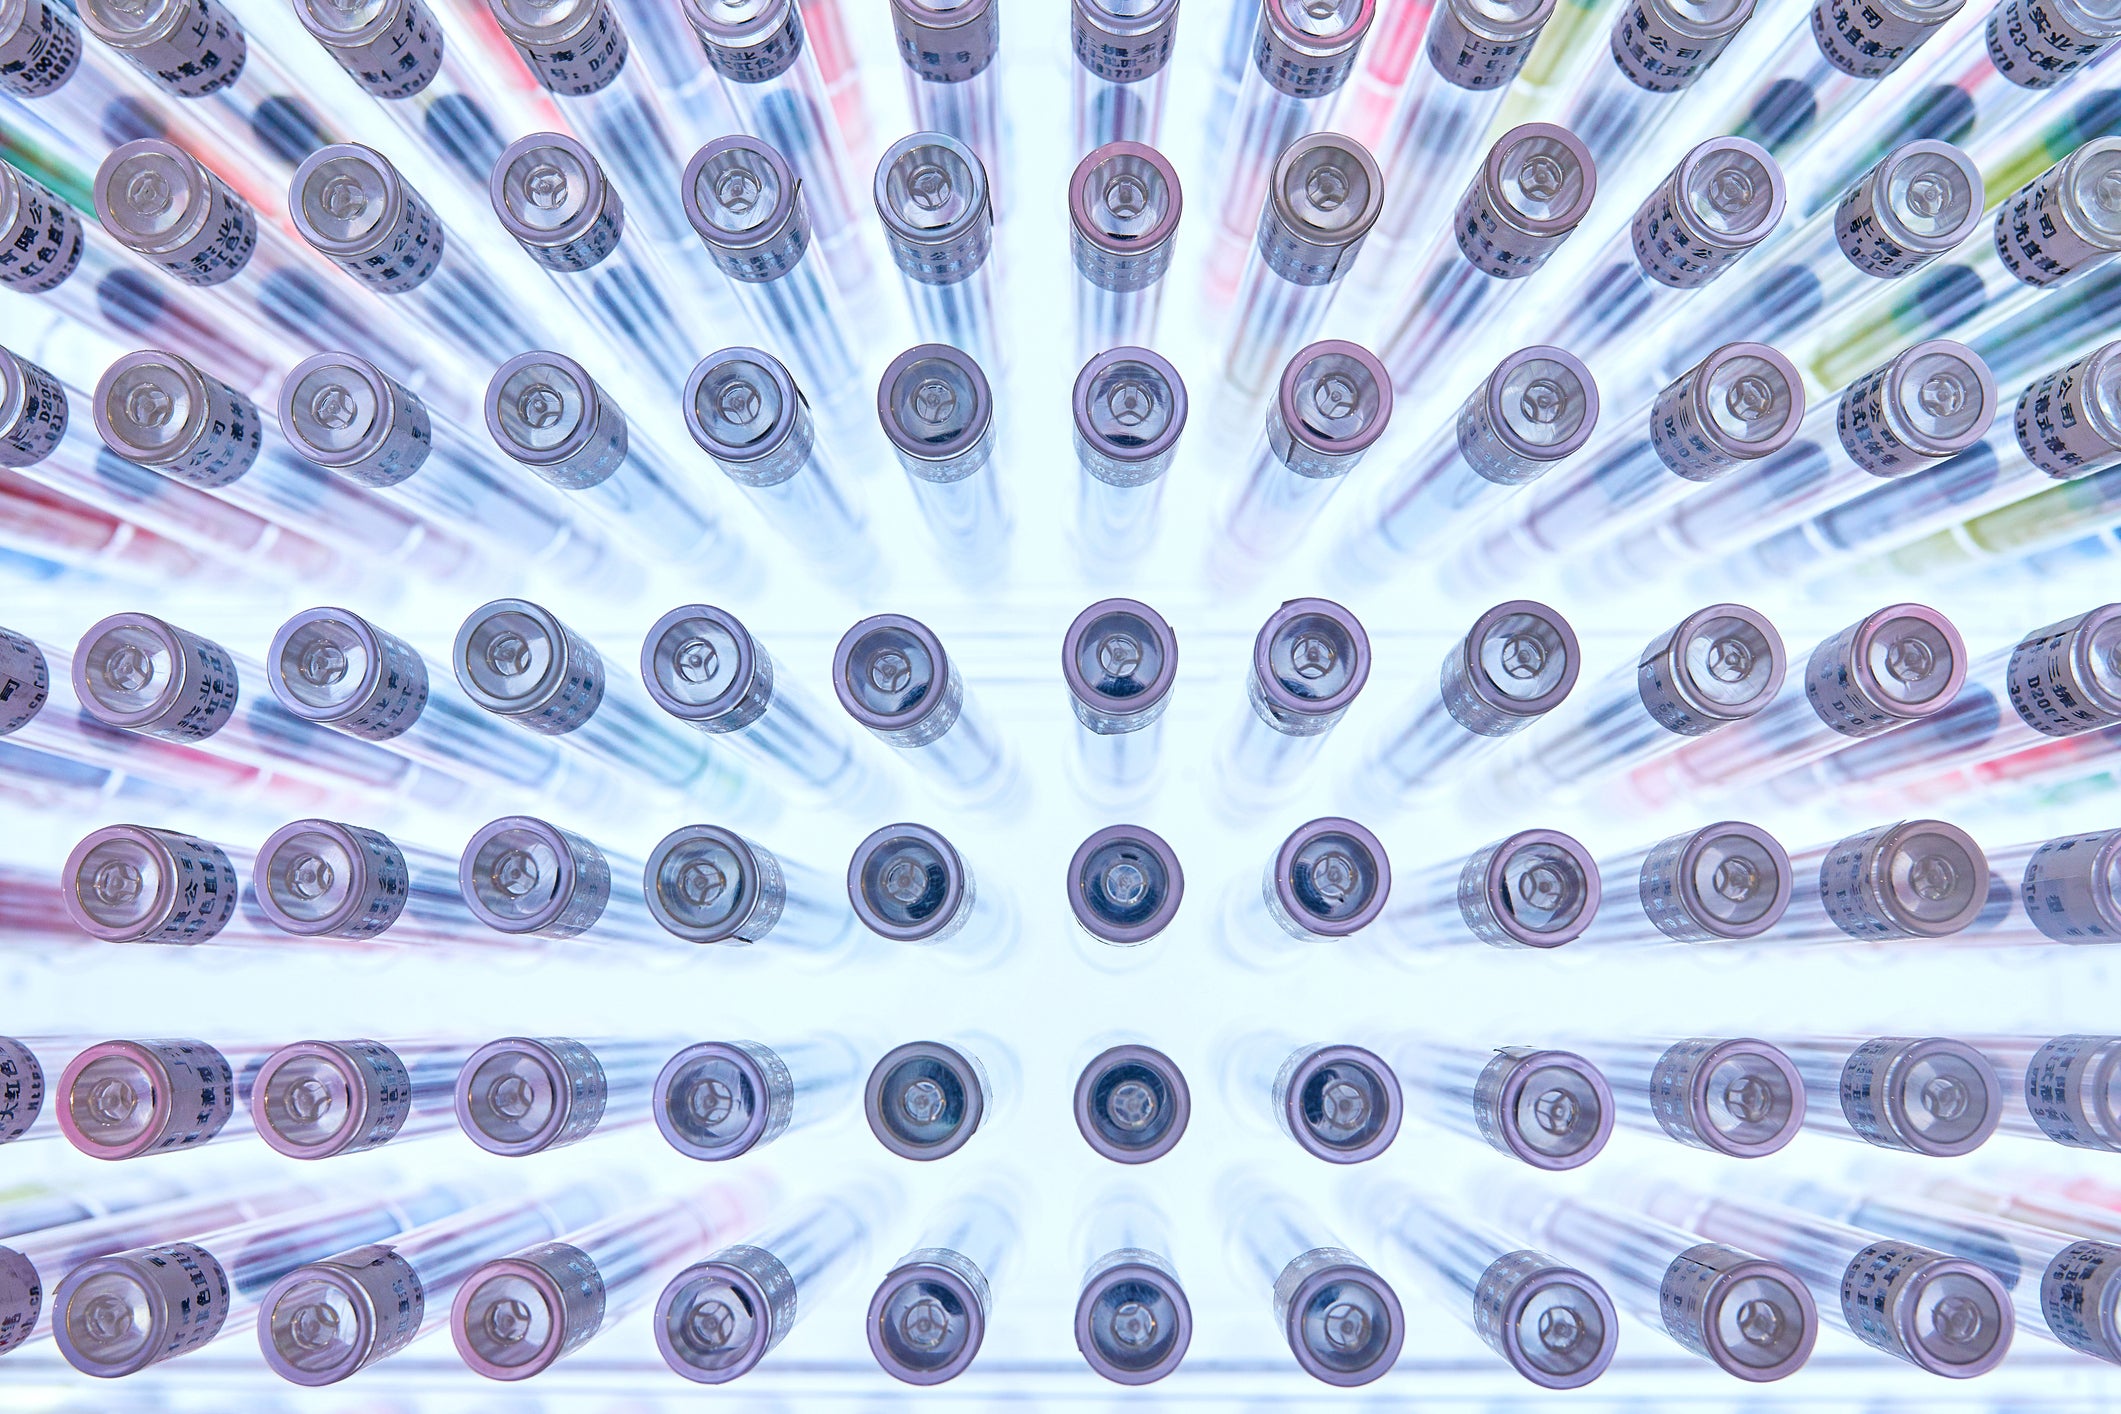 An overhead view of test tubes on a tray.